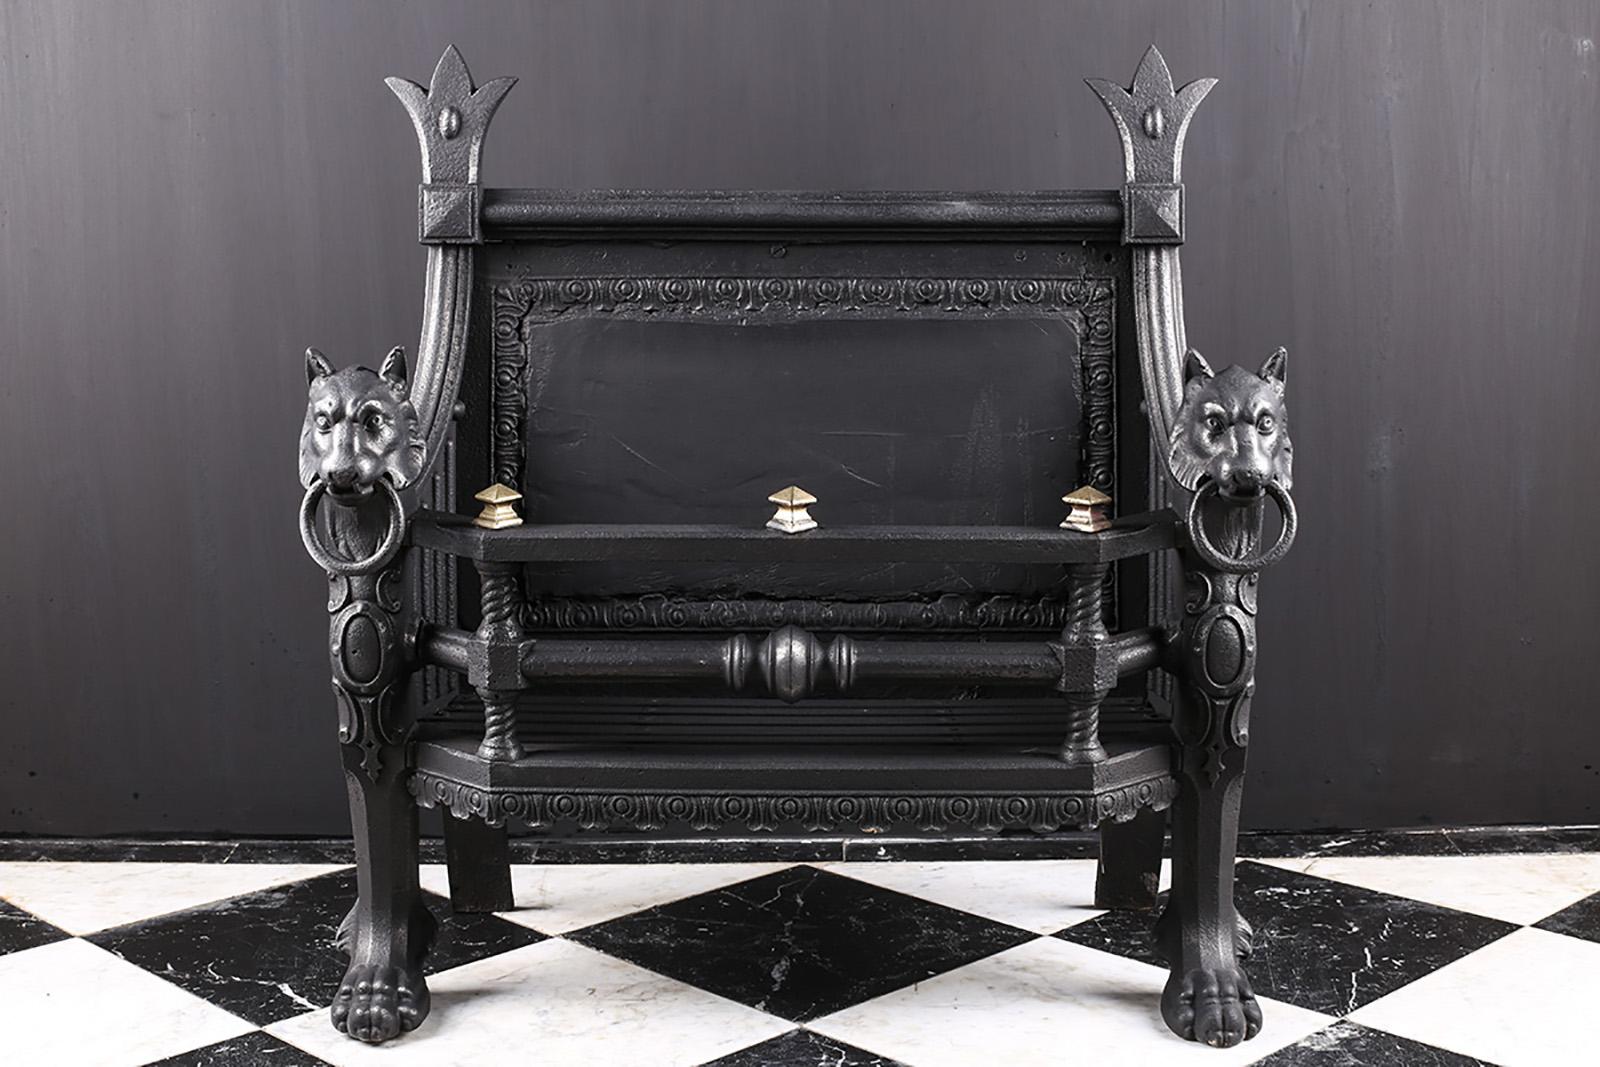 Large Regency cast iron fire basket circa 1820

A large English Regency cast iron fire basket, with two wolfhound andirons with rings in their mouths and paw feet, the front bars with tie baton detail, English, circa 1820.

Depth: 16? – 40.6